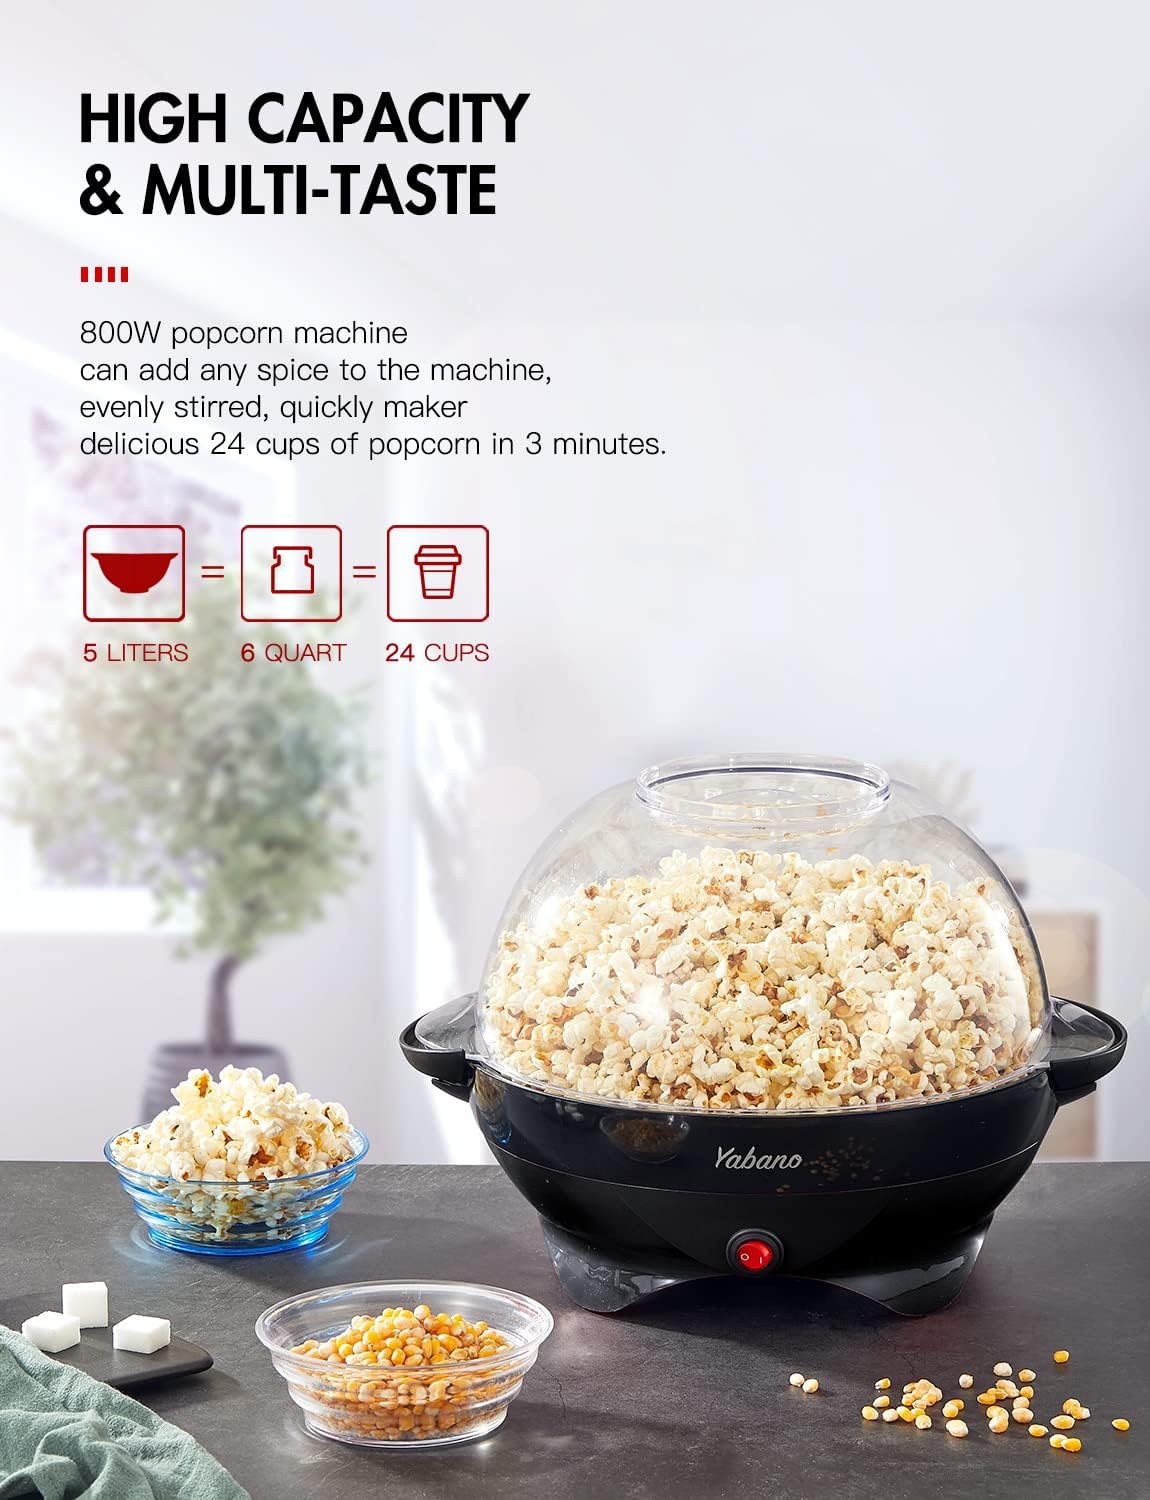 Yabano Popcorn Maker Machine, 5L Popcorn Popper, Nonstick Plate, Electric Stirring with Quick - Heat Technology, Cool Touch Handles, Healthy Less Fat, 800W, BLACK - Amazing Gadgets Outlet